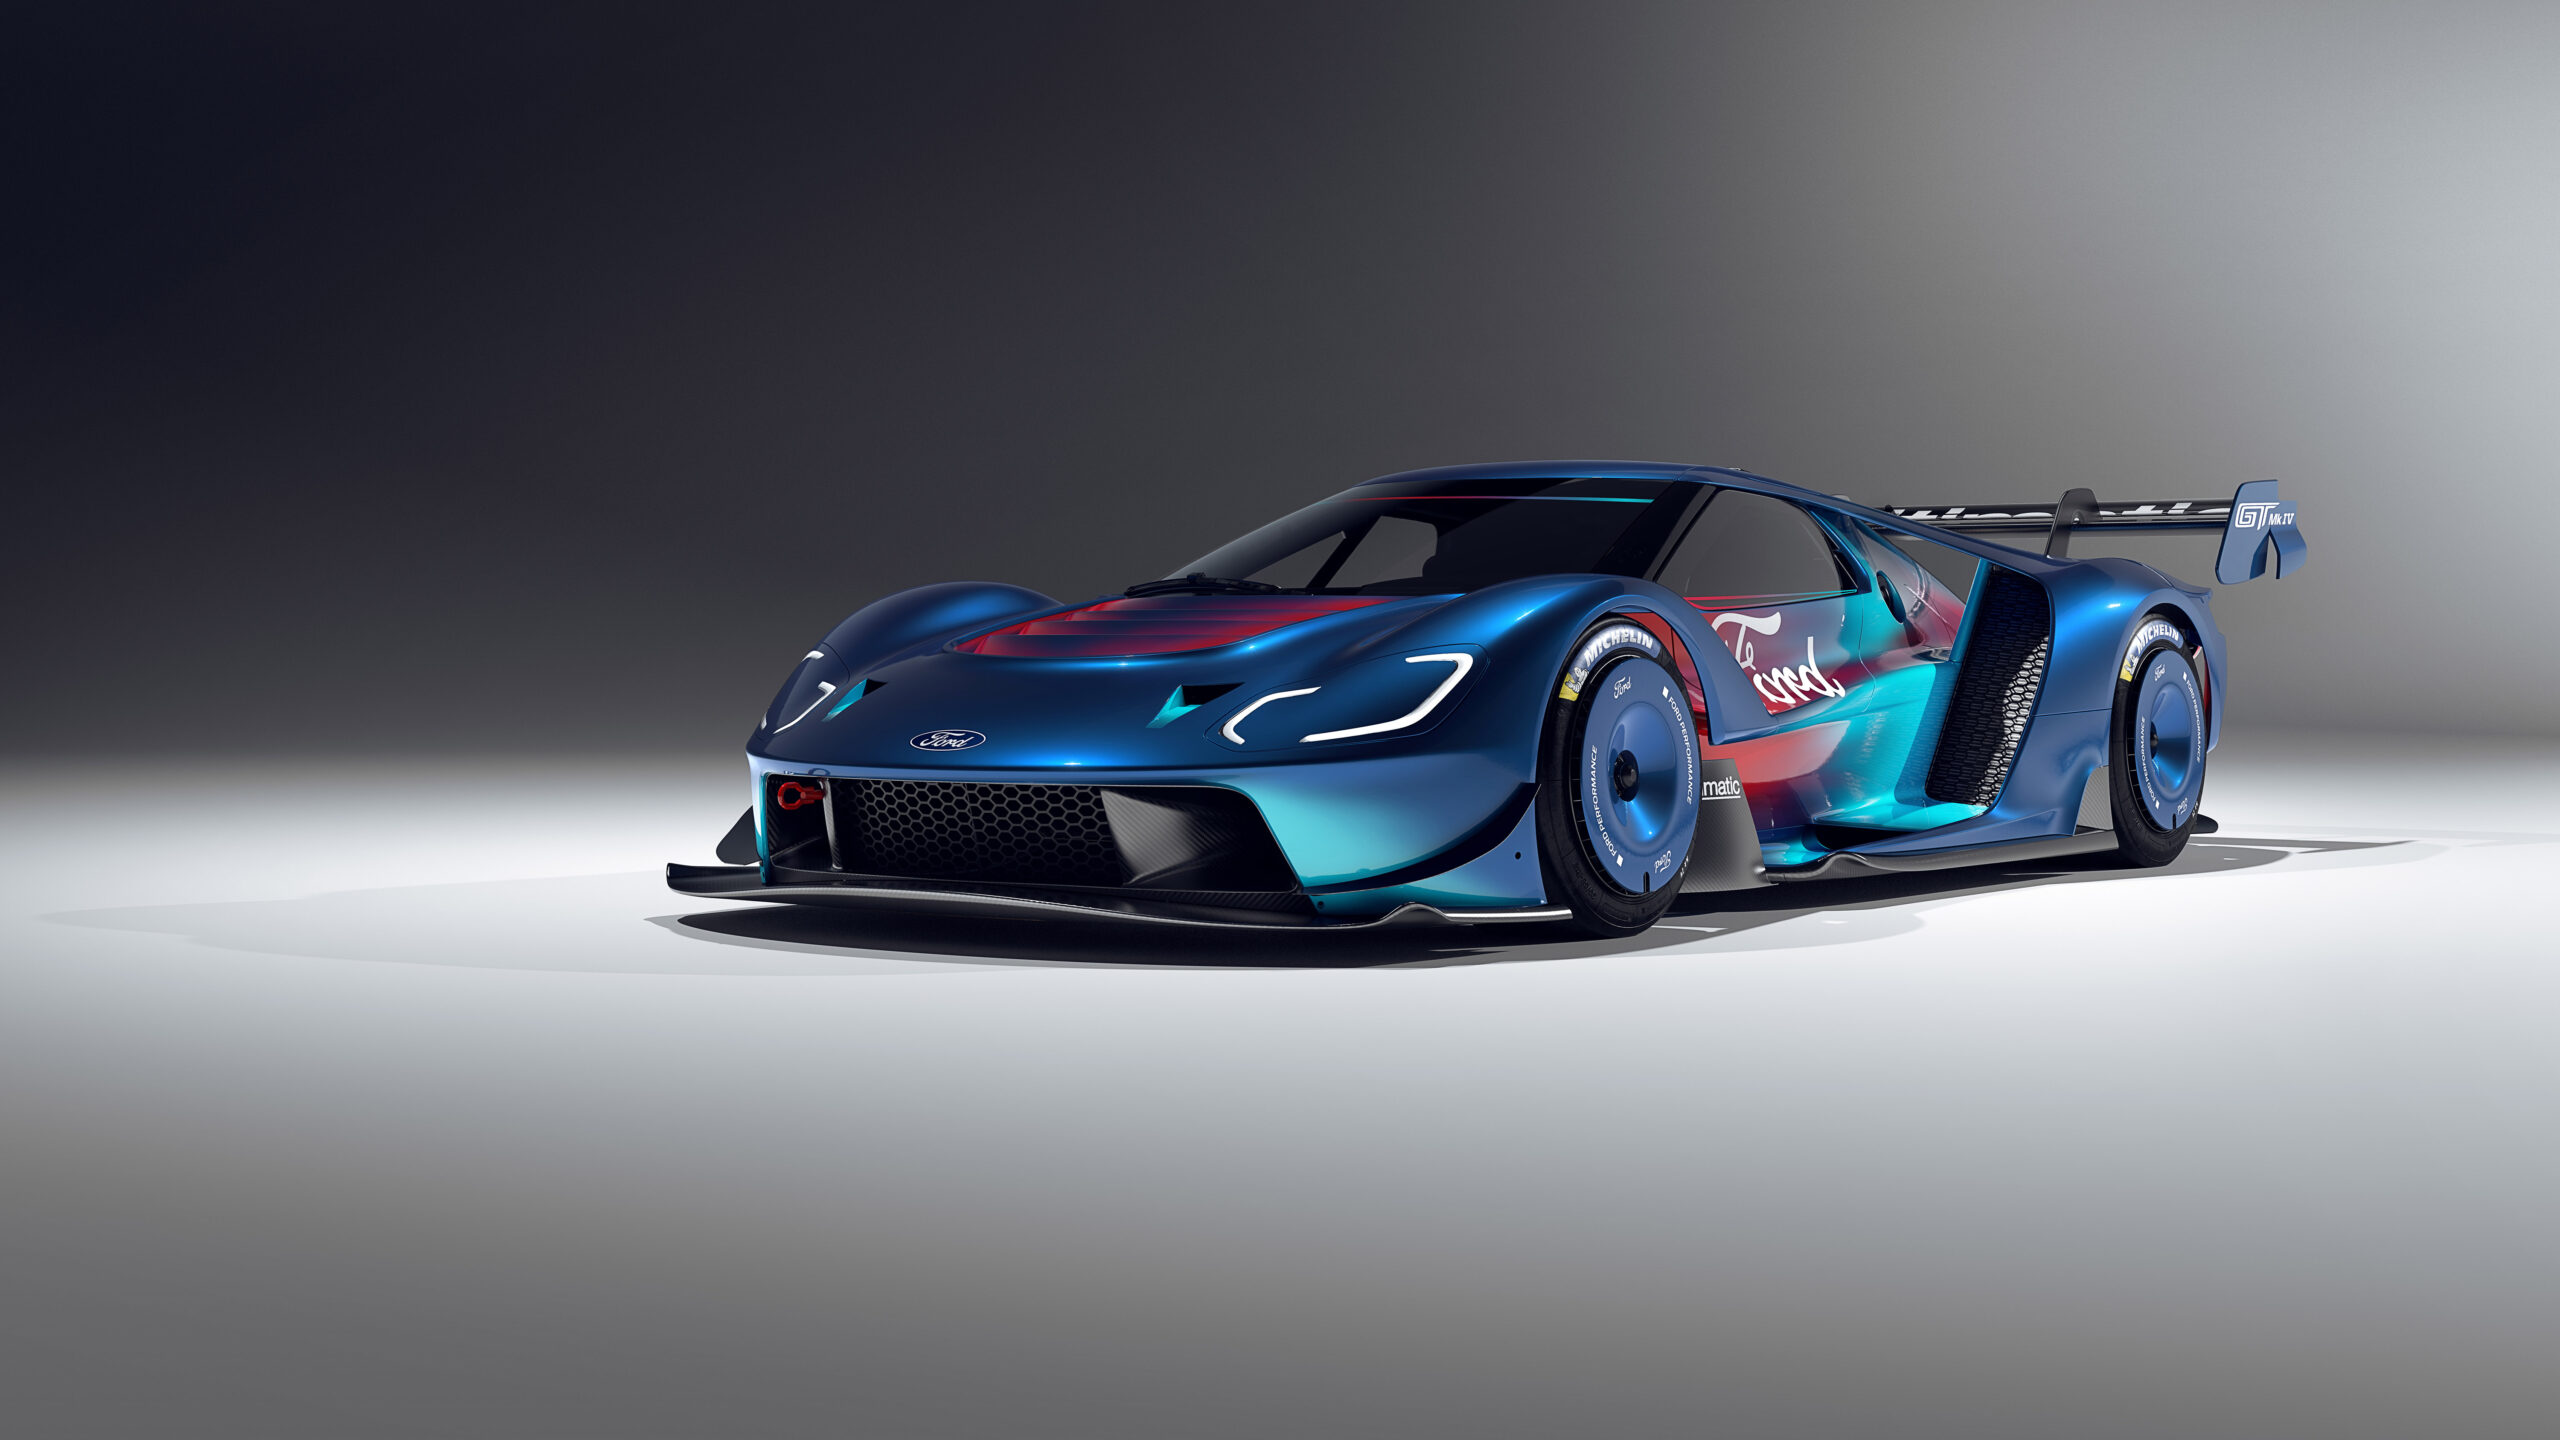 Limited Edition Ford GT Mk IV is the Ultimate Track-Only Ford GT, Unconstrained for Extreme Performance